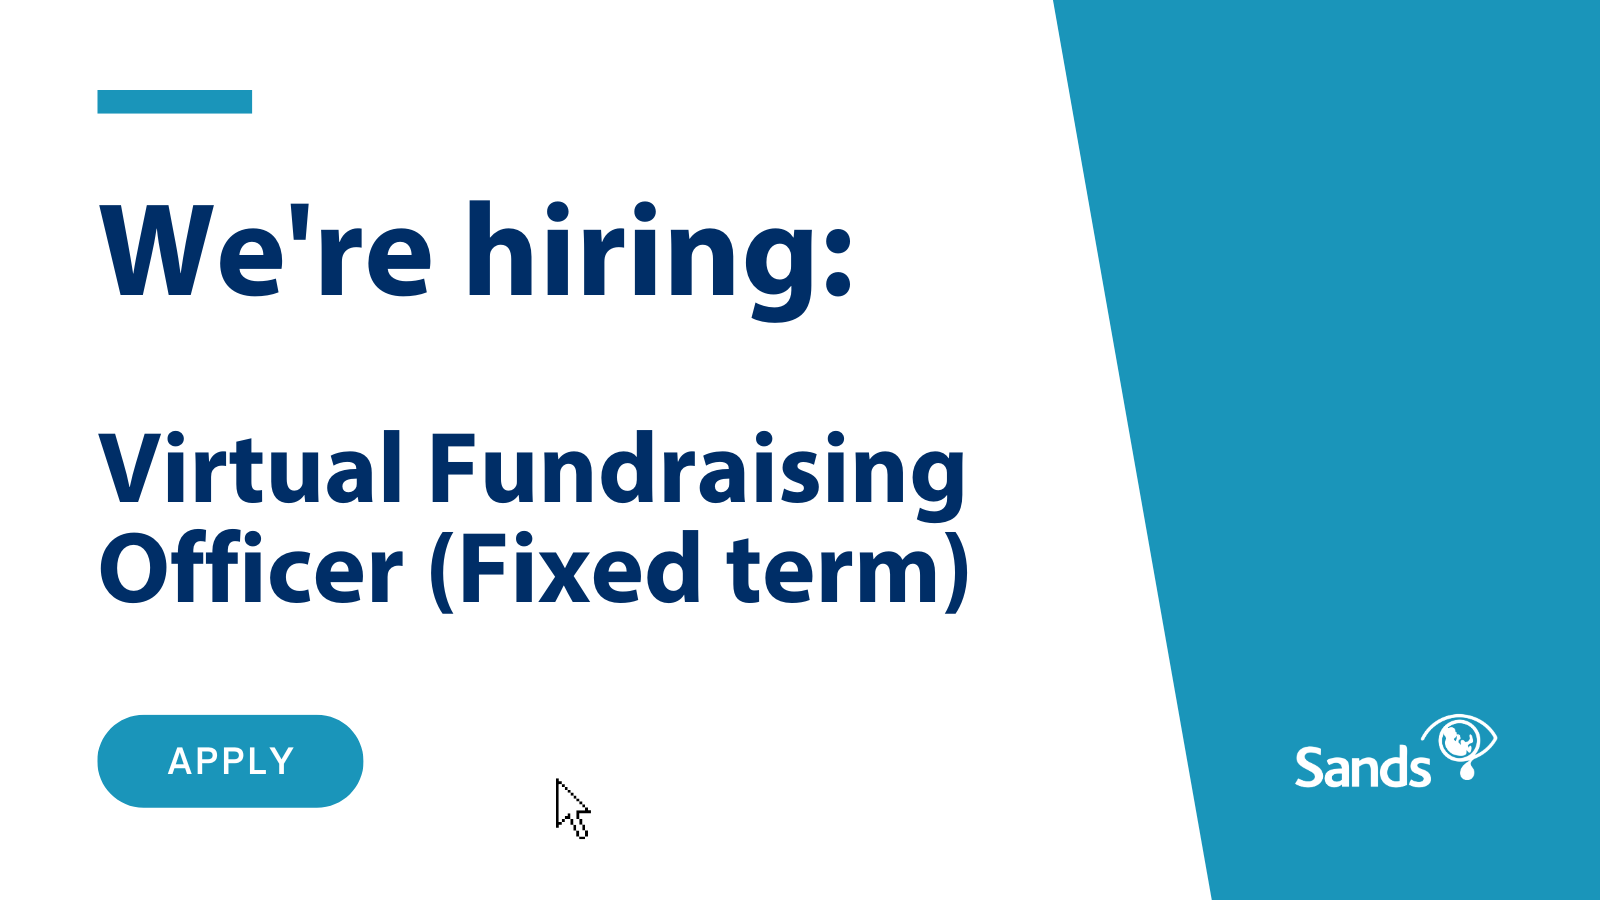 We are hiring Virtual Fundraising Officer Fixed Term